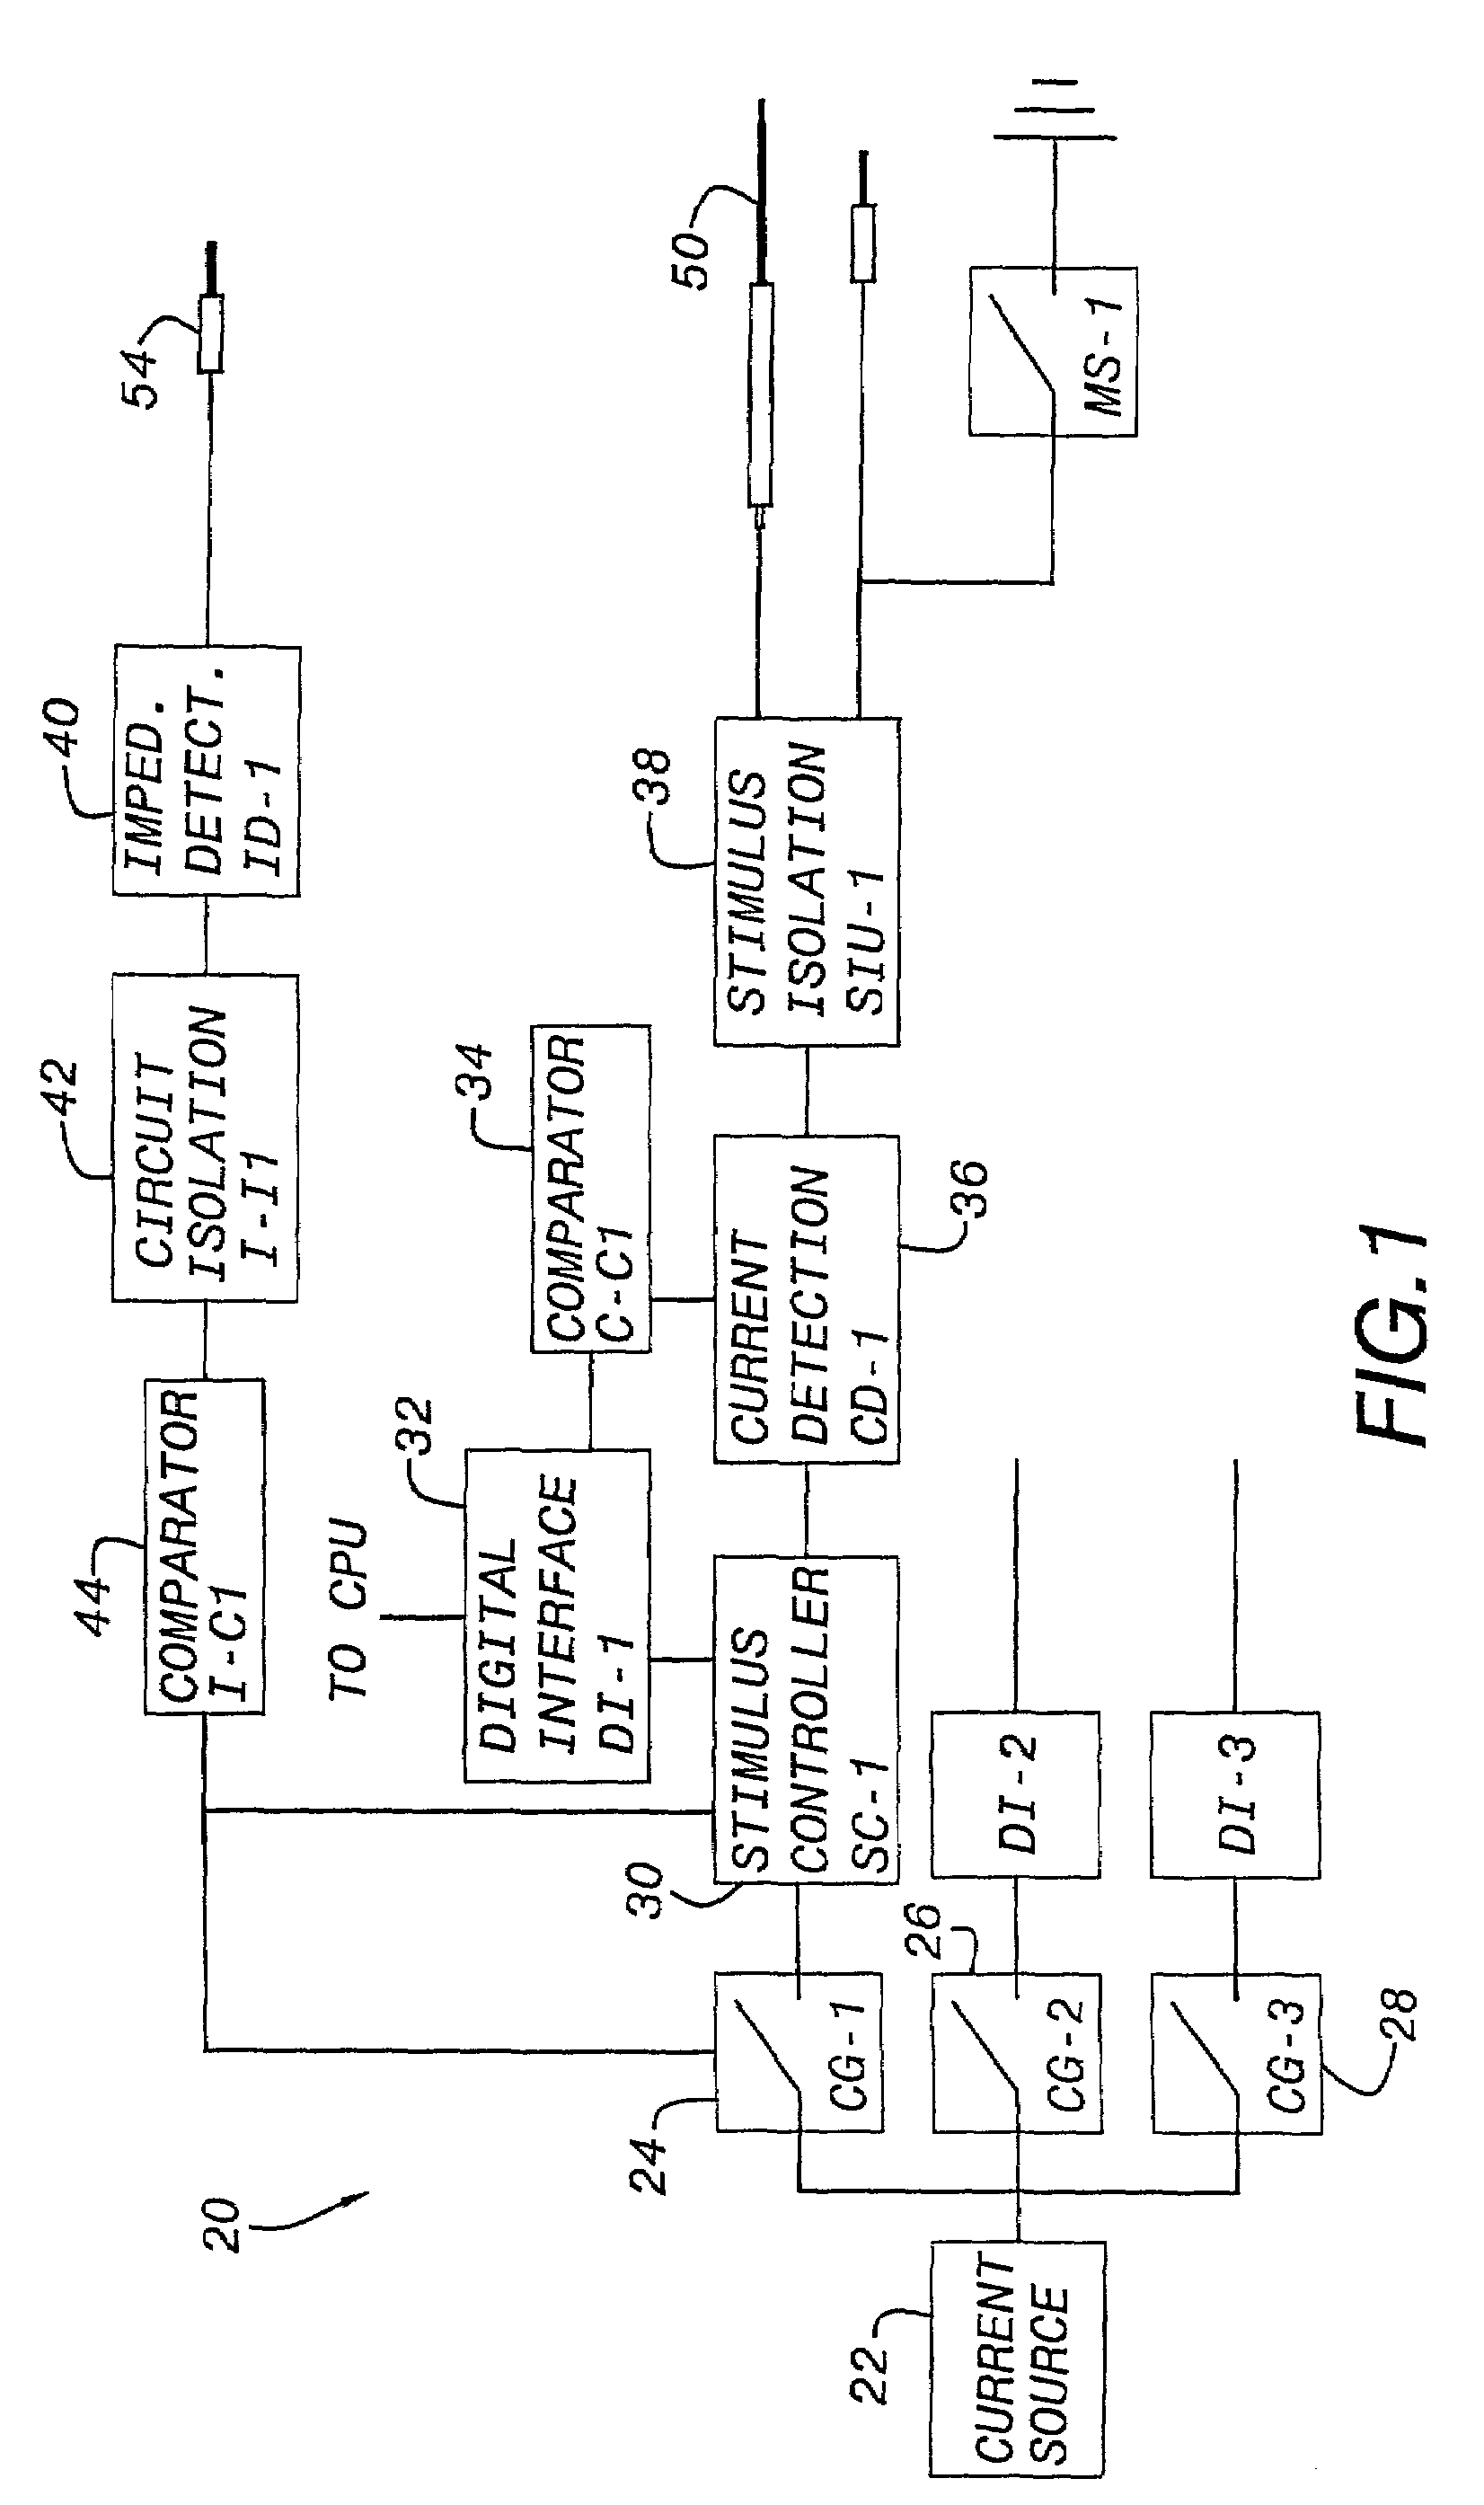 Intraoperative neurophysiological monitoring system